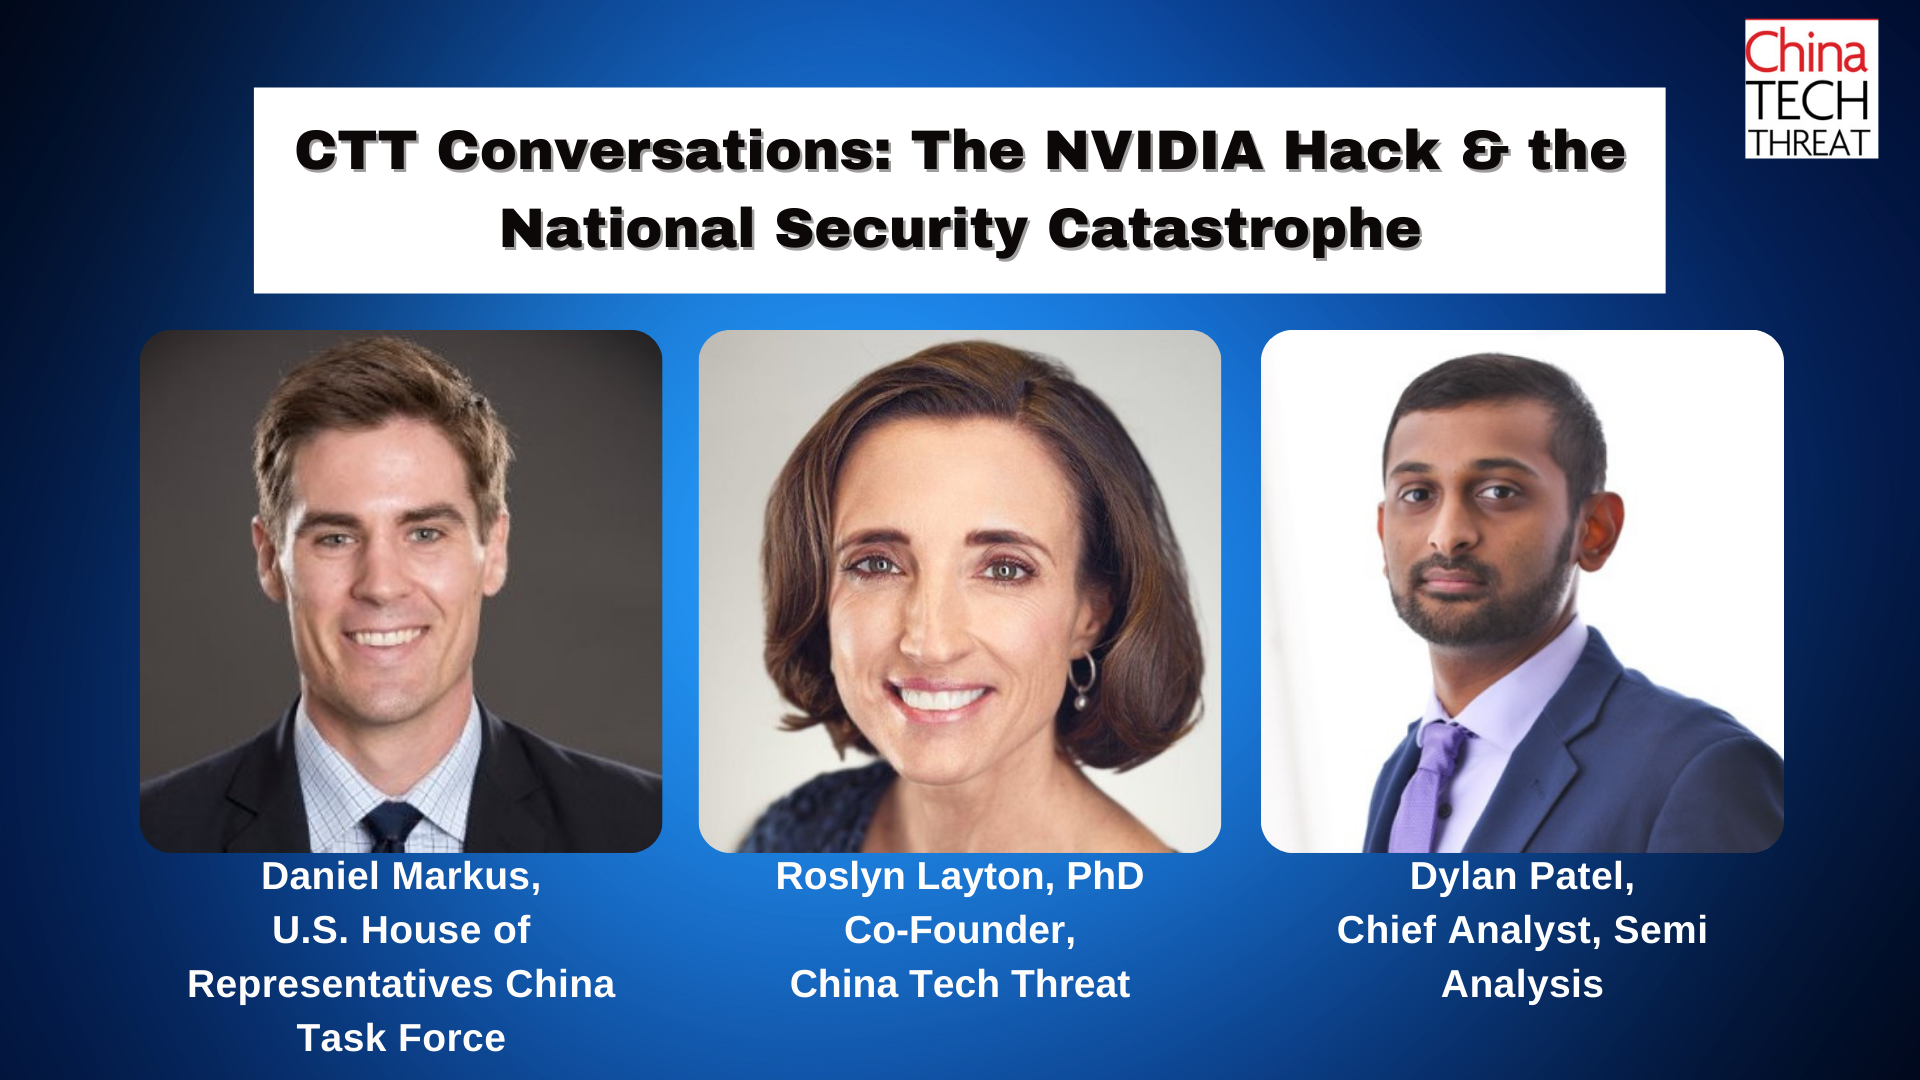 CTT Conversations: The NVIDIA Hack and the National Security Catastrophe